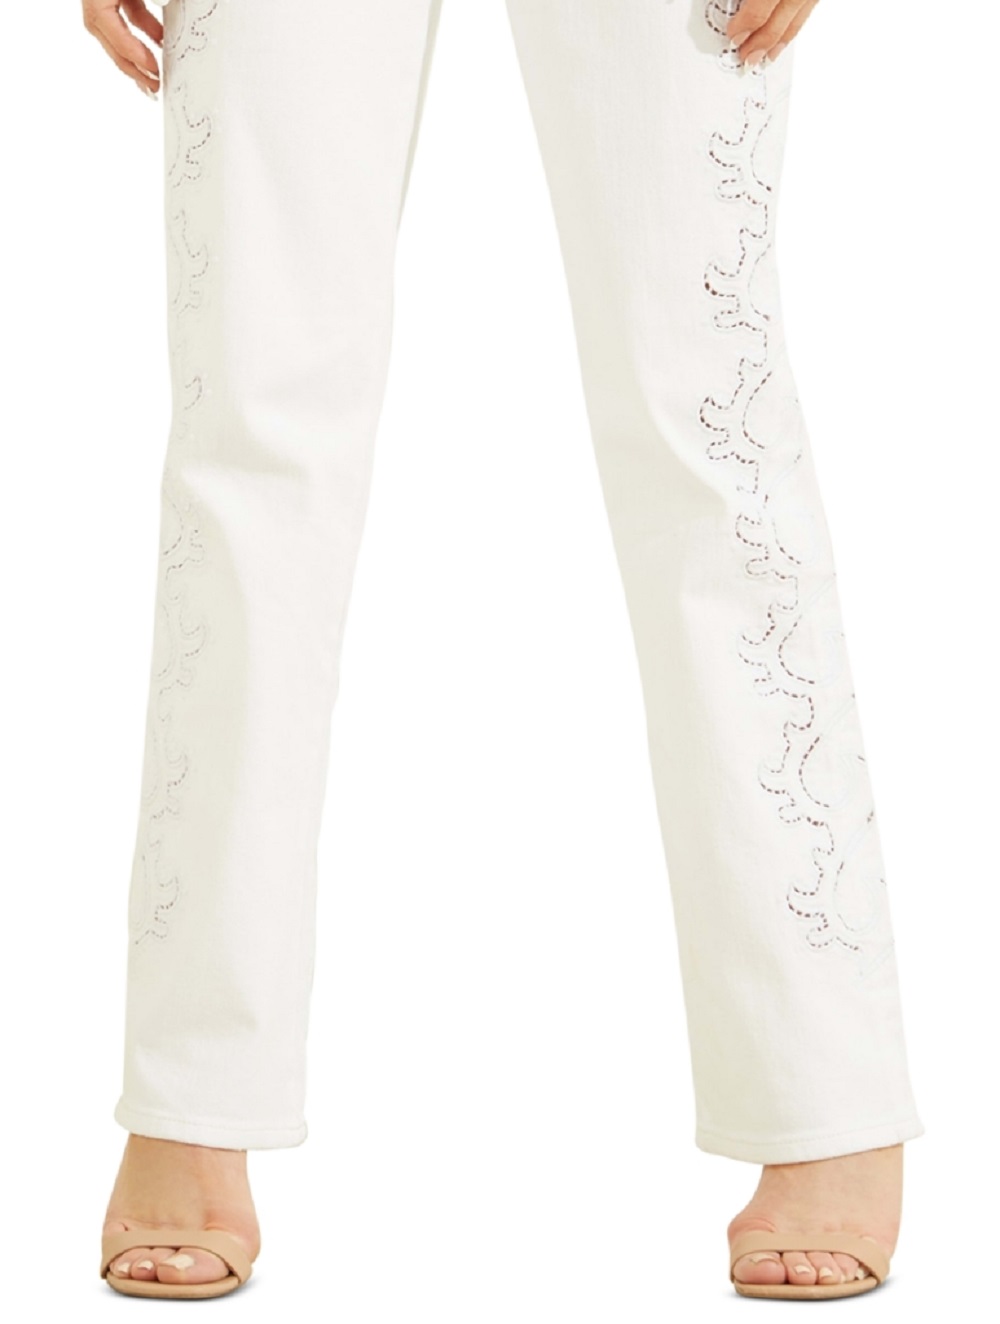 GUESS Women's Embroidered Straight Leg Jeans White Size 31X33